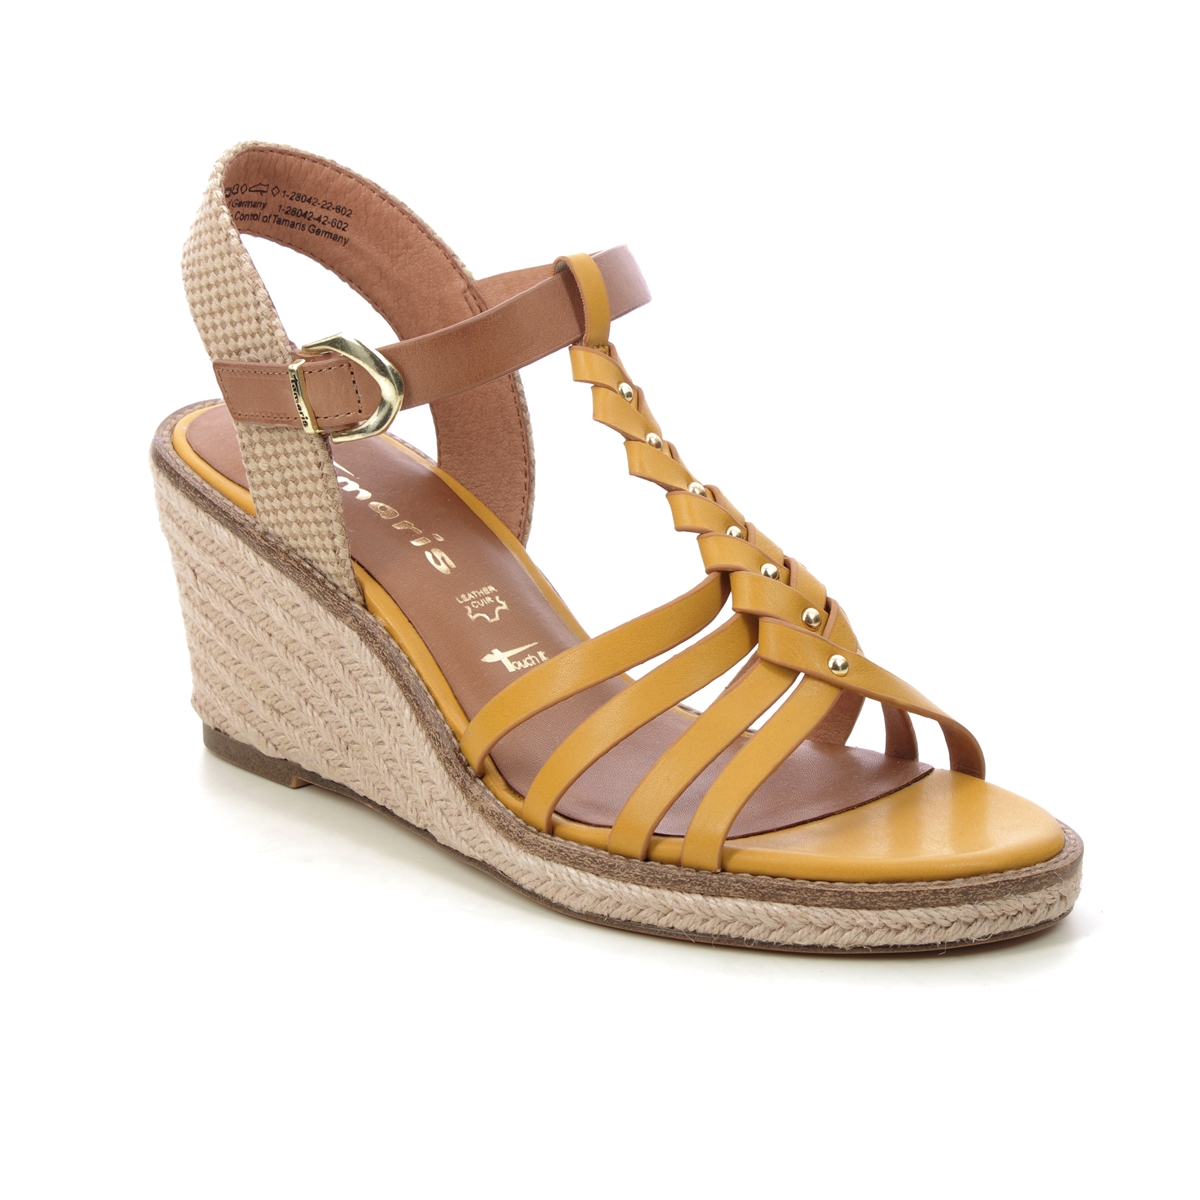 Tamaris Livi Espadrille Yellow Womens Wedge Sandals 28042-42-602 in a Plain Man-made in Size 38